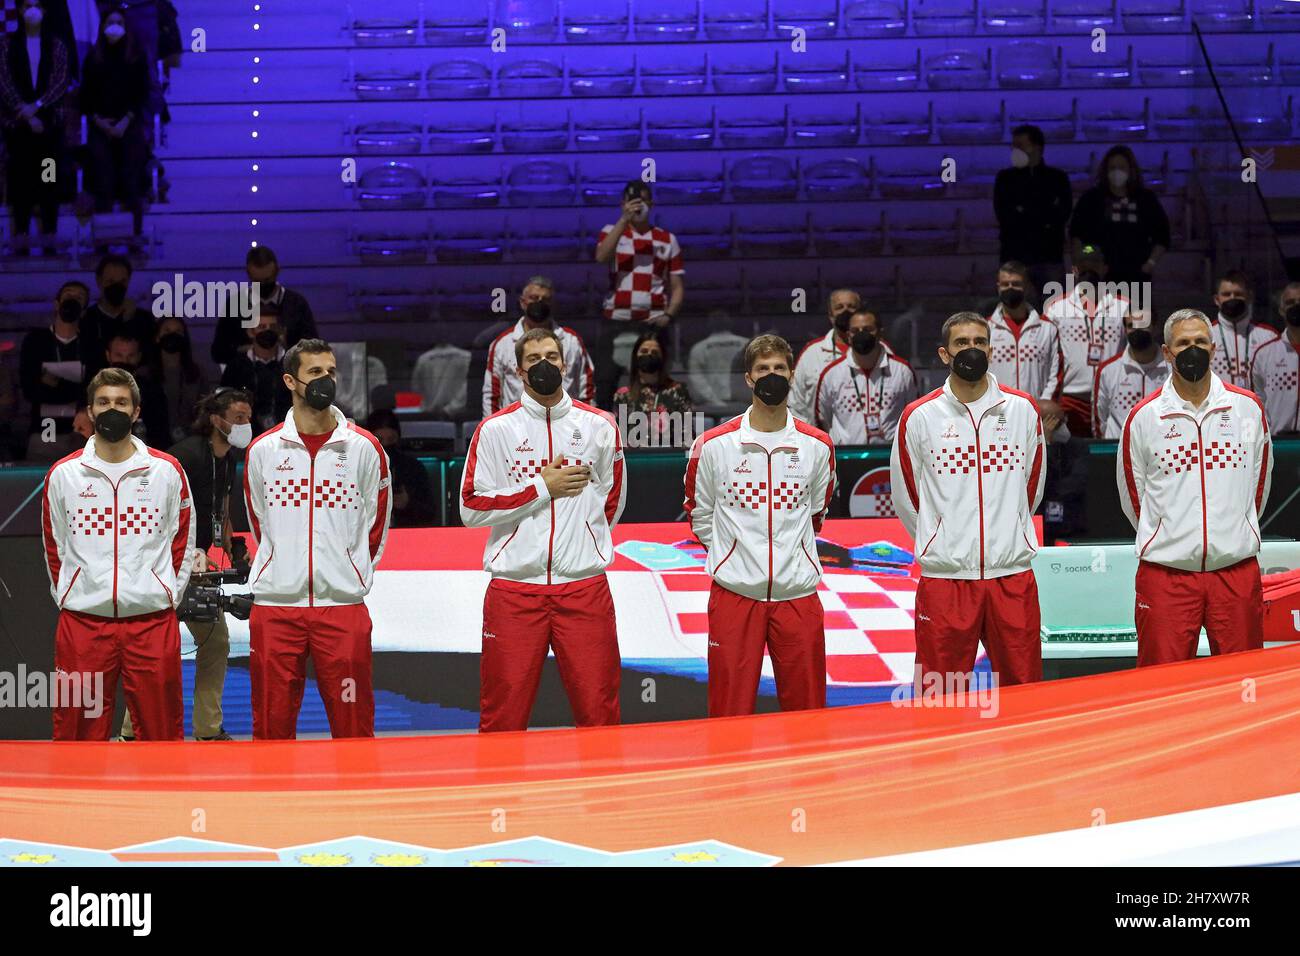 Turin, Italy. 25th Nov, 2021. The team of Croatia at the begin of the match during Davis Cup Finals 2021, Tennis Internationals in Turin, Italy, November 25 2021 Credit: Independent Photo Agency/Alamy Live News Stock Photo